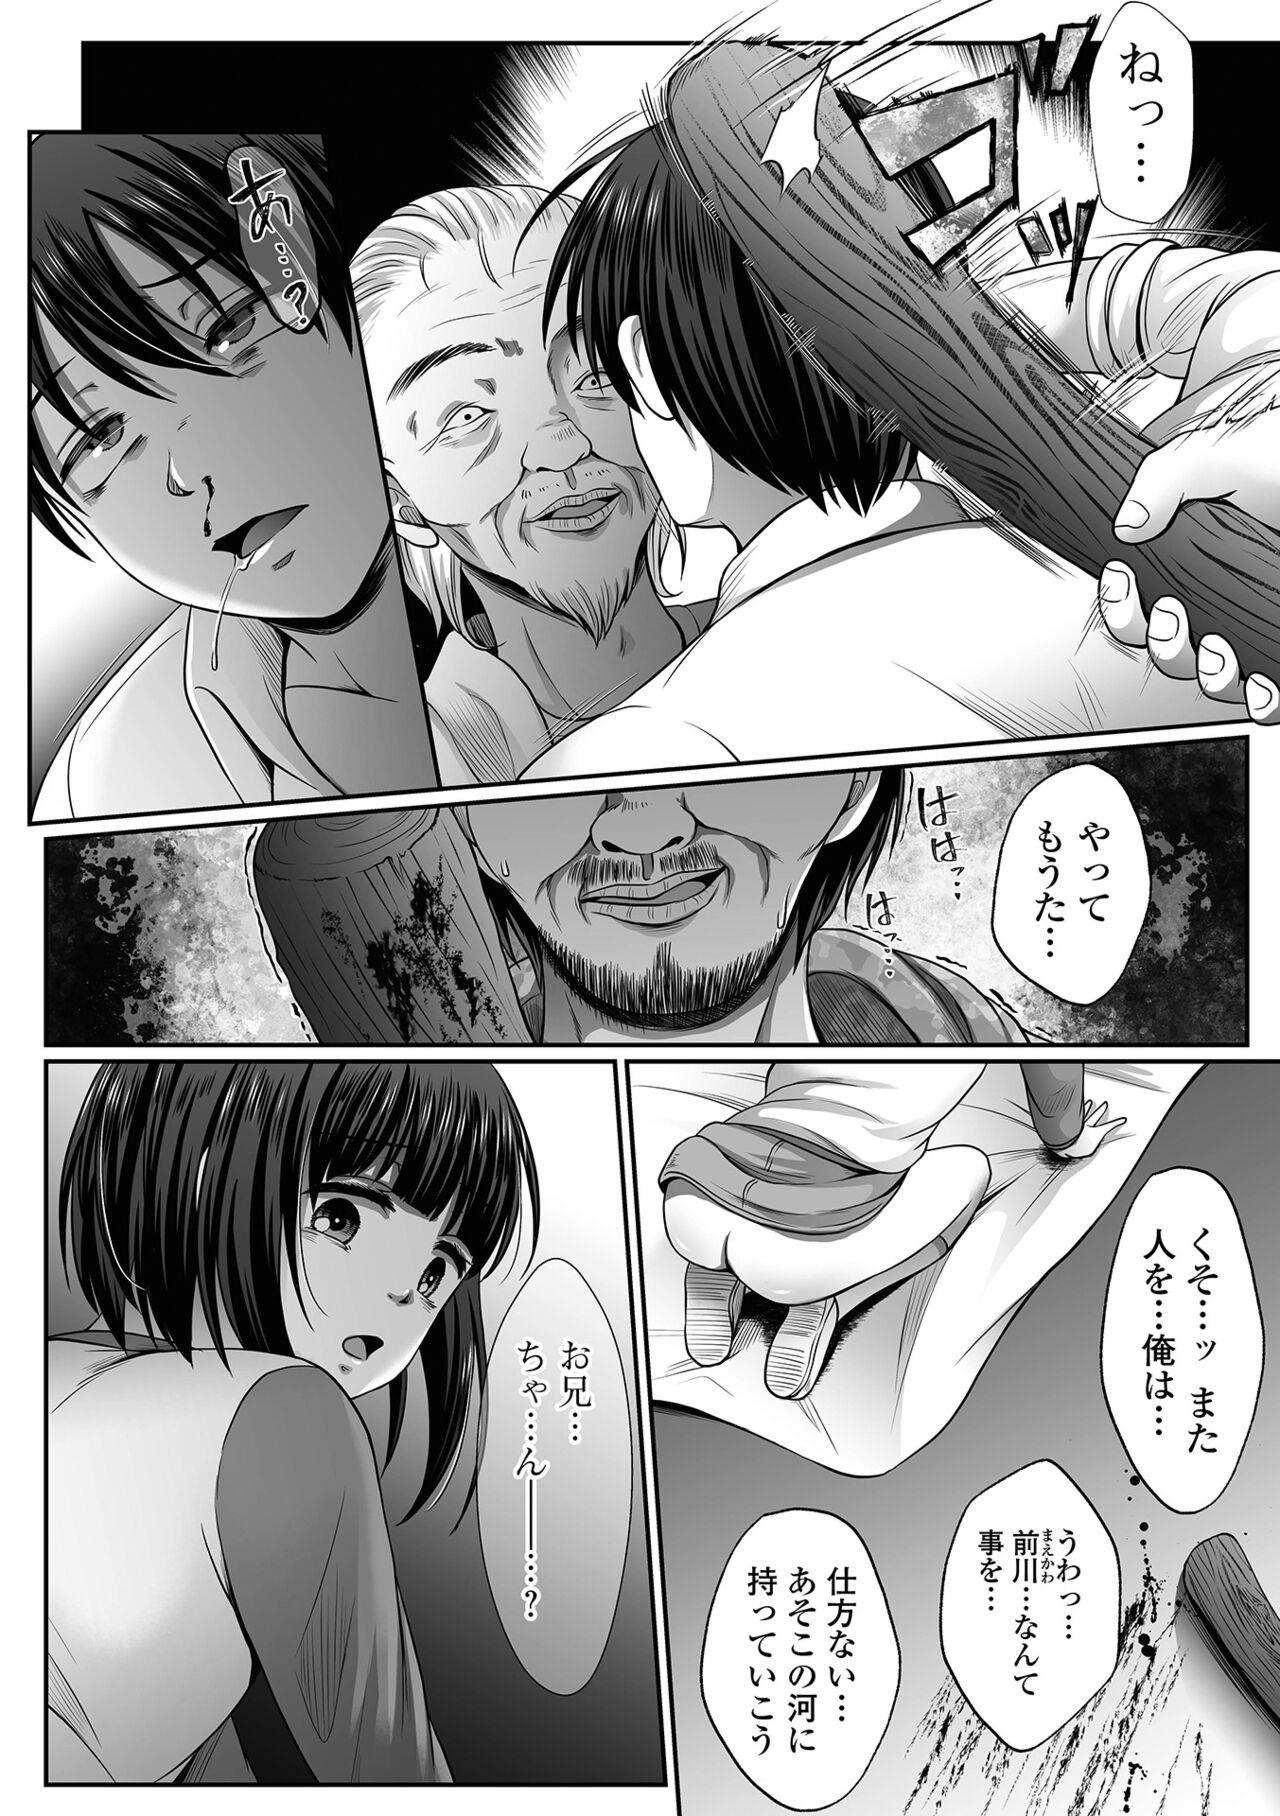 Mommy COMIC Mate Legend Vol. 49 2022-12 Coed - Page 8